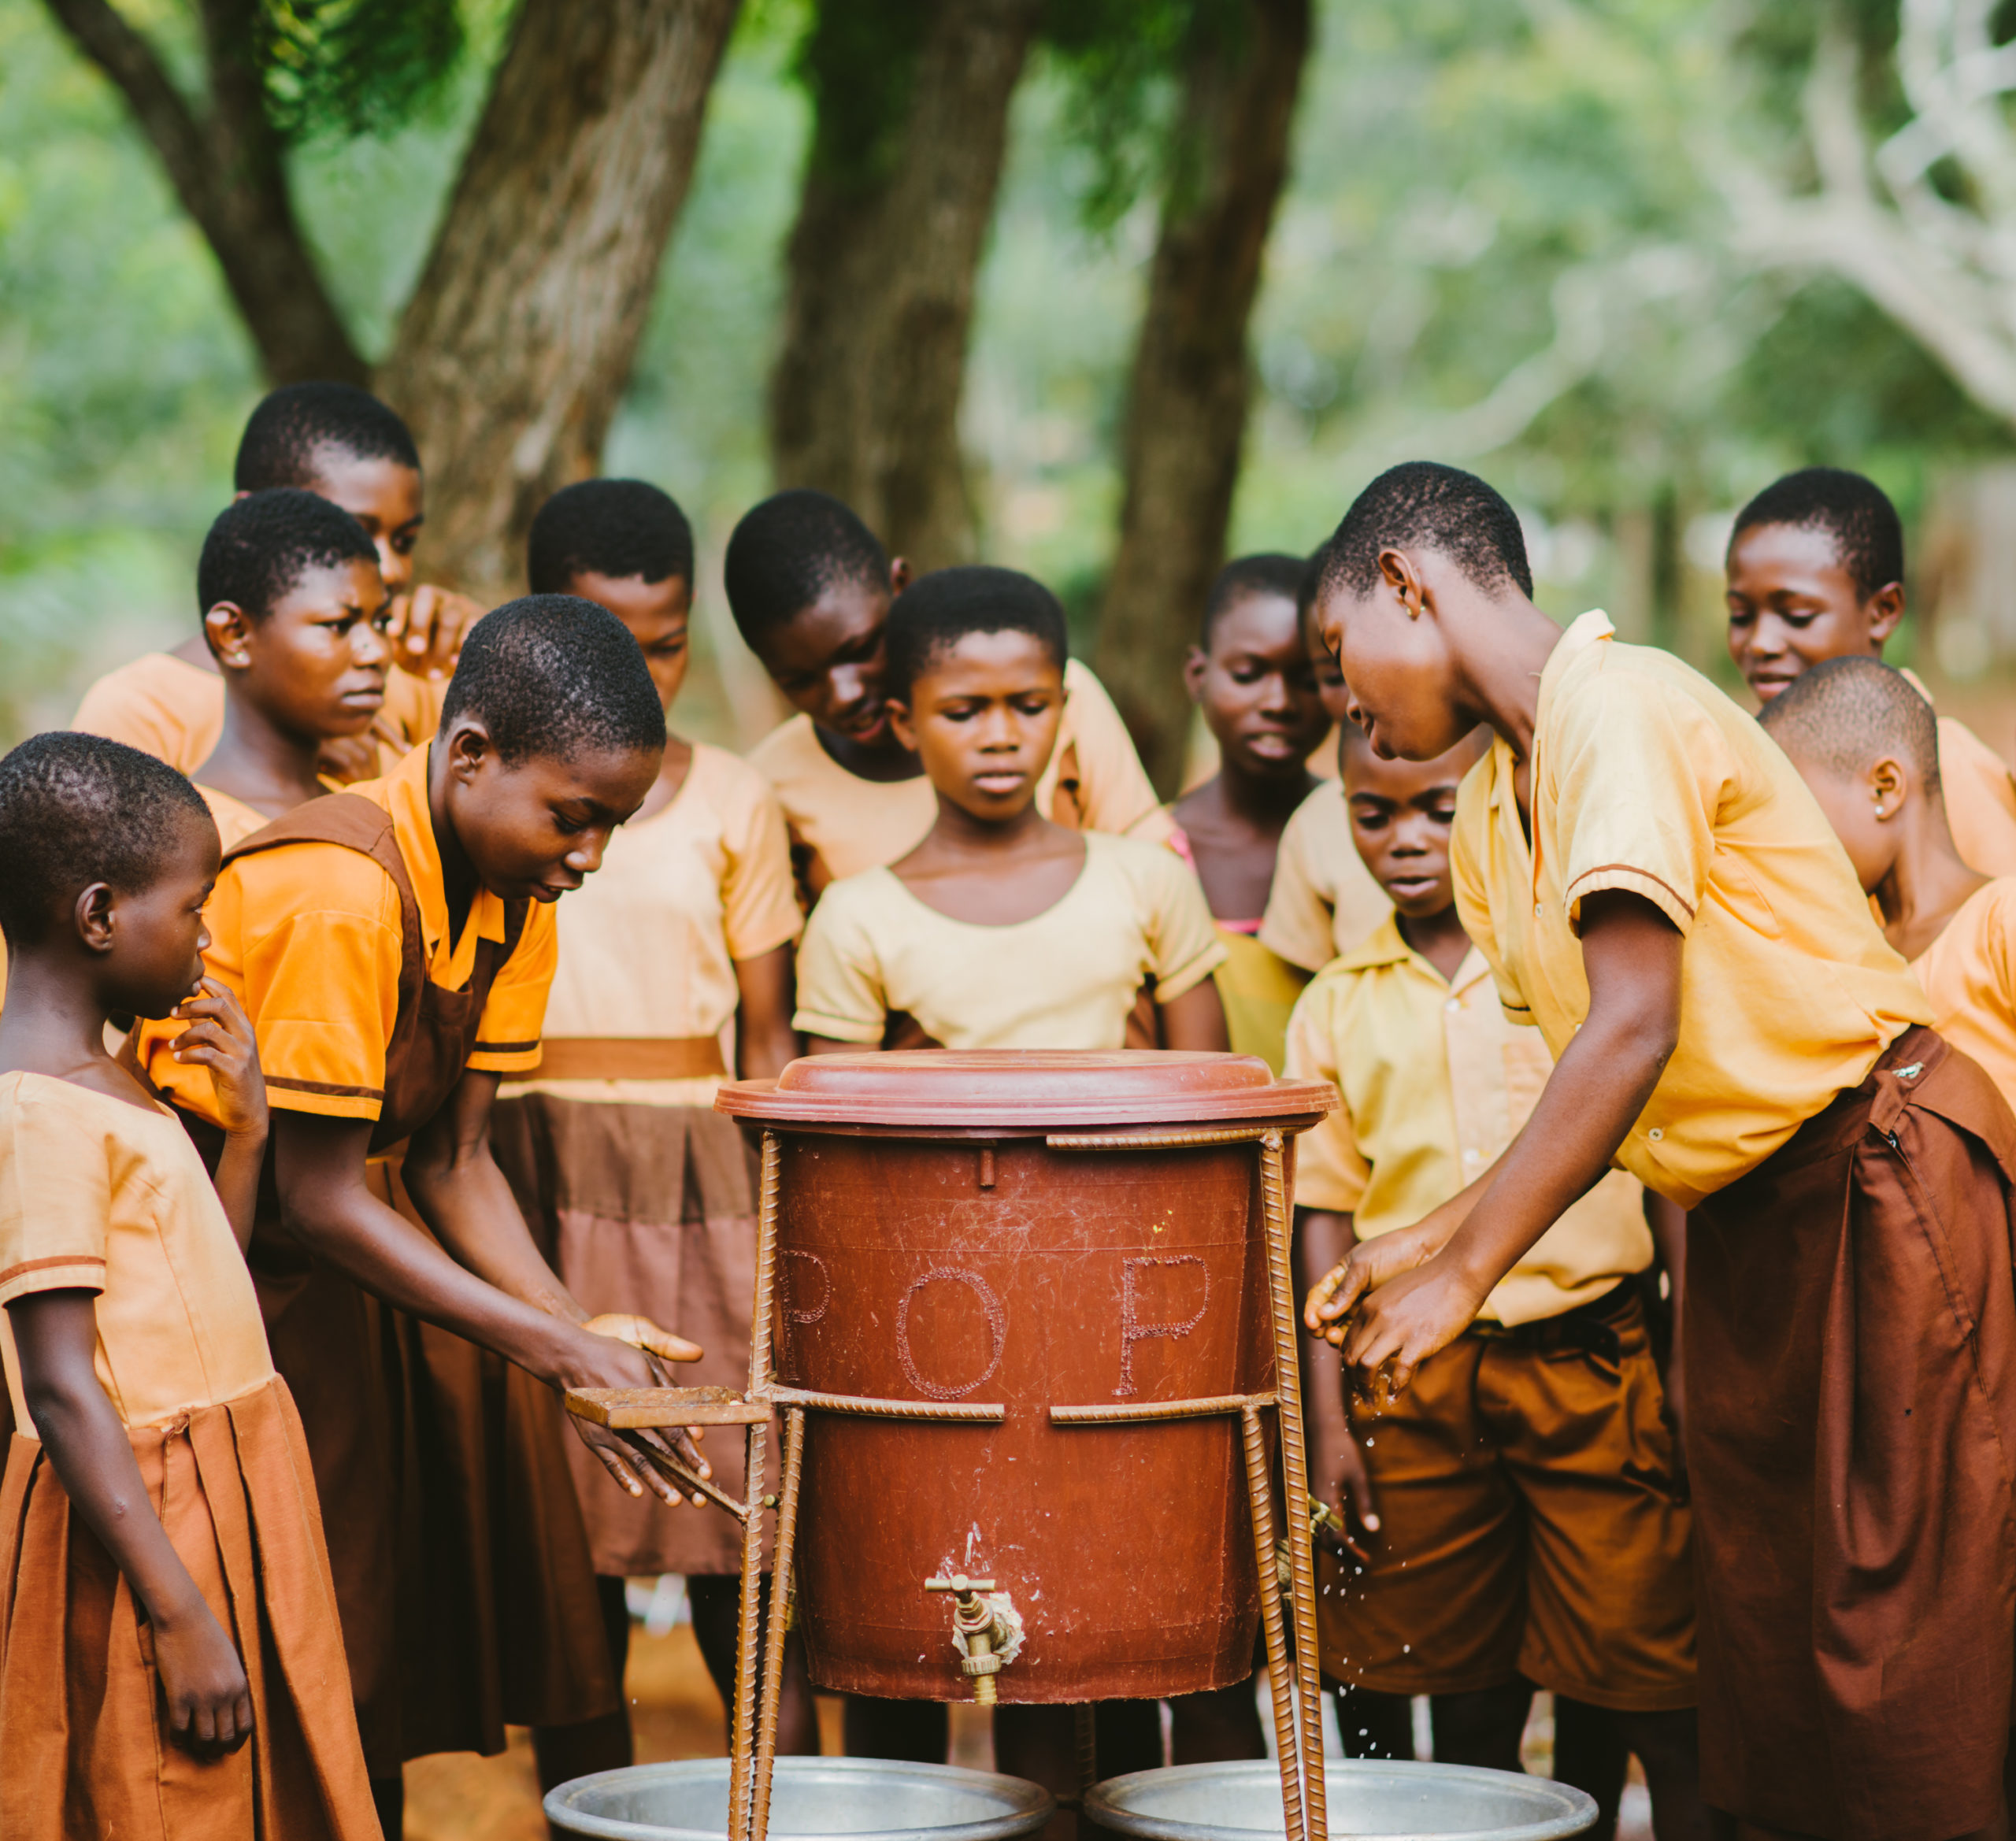 A group of students in Ghana use a handwashing station provided by PoP.